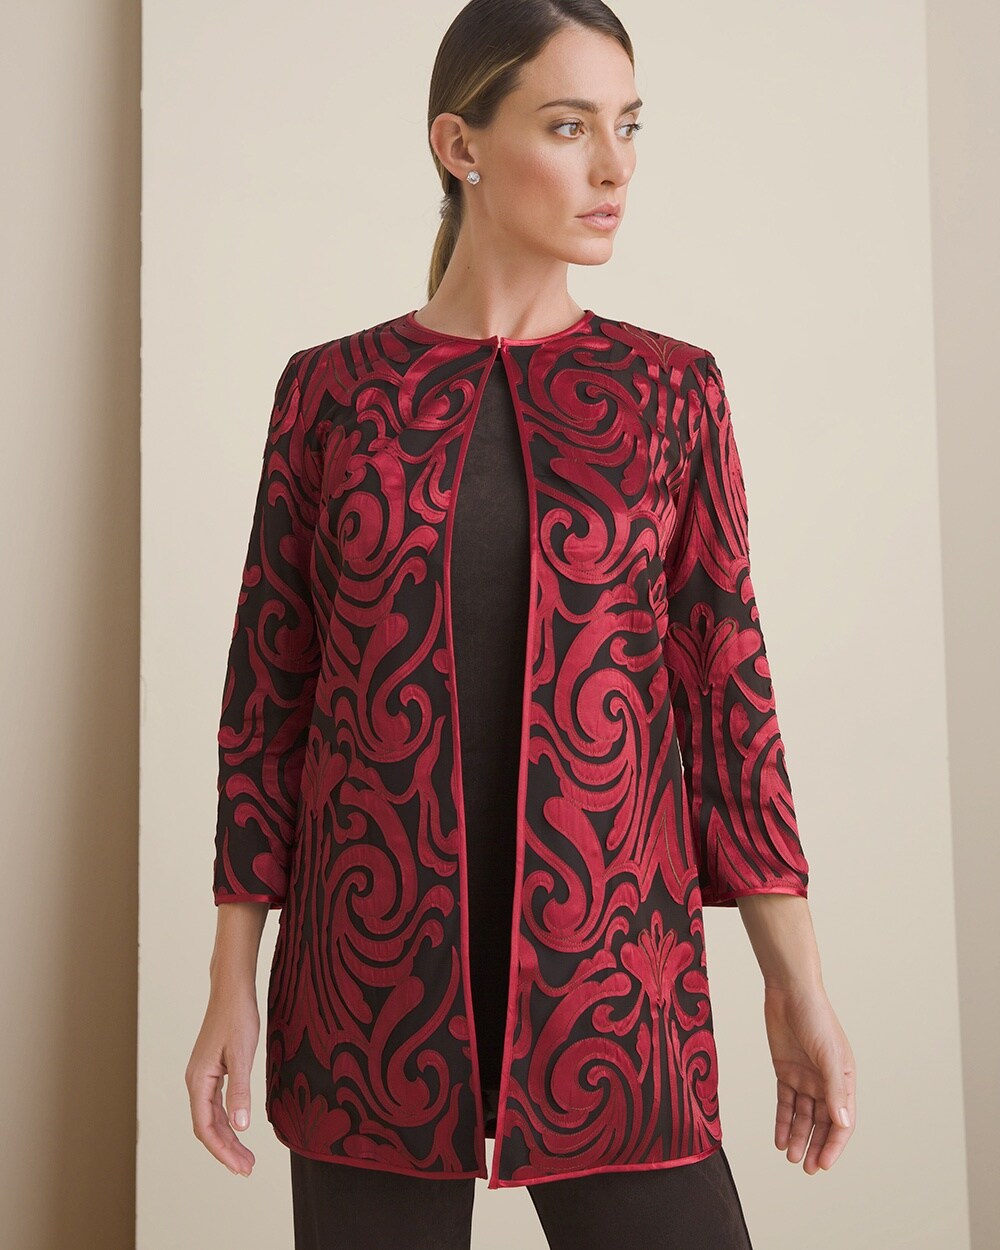 Travelers Collection Satin and Mesh Paisley Jacket